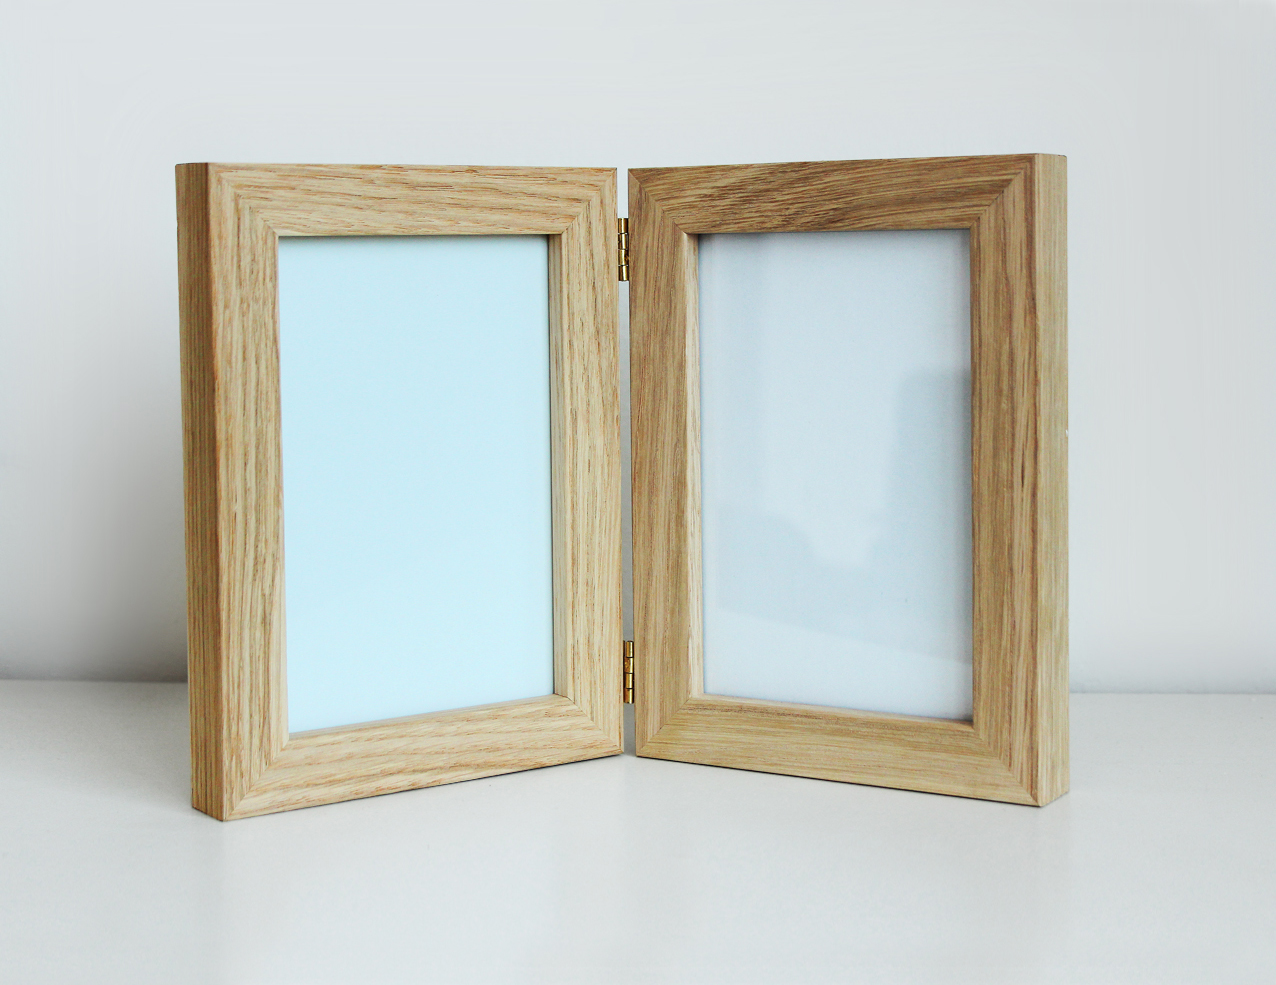 Joint photo frames made with oak wood profile, in tabletop sizes. Picture frame producer Debex Suisse.